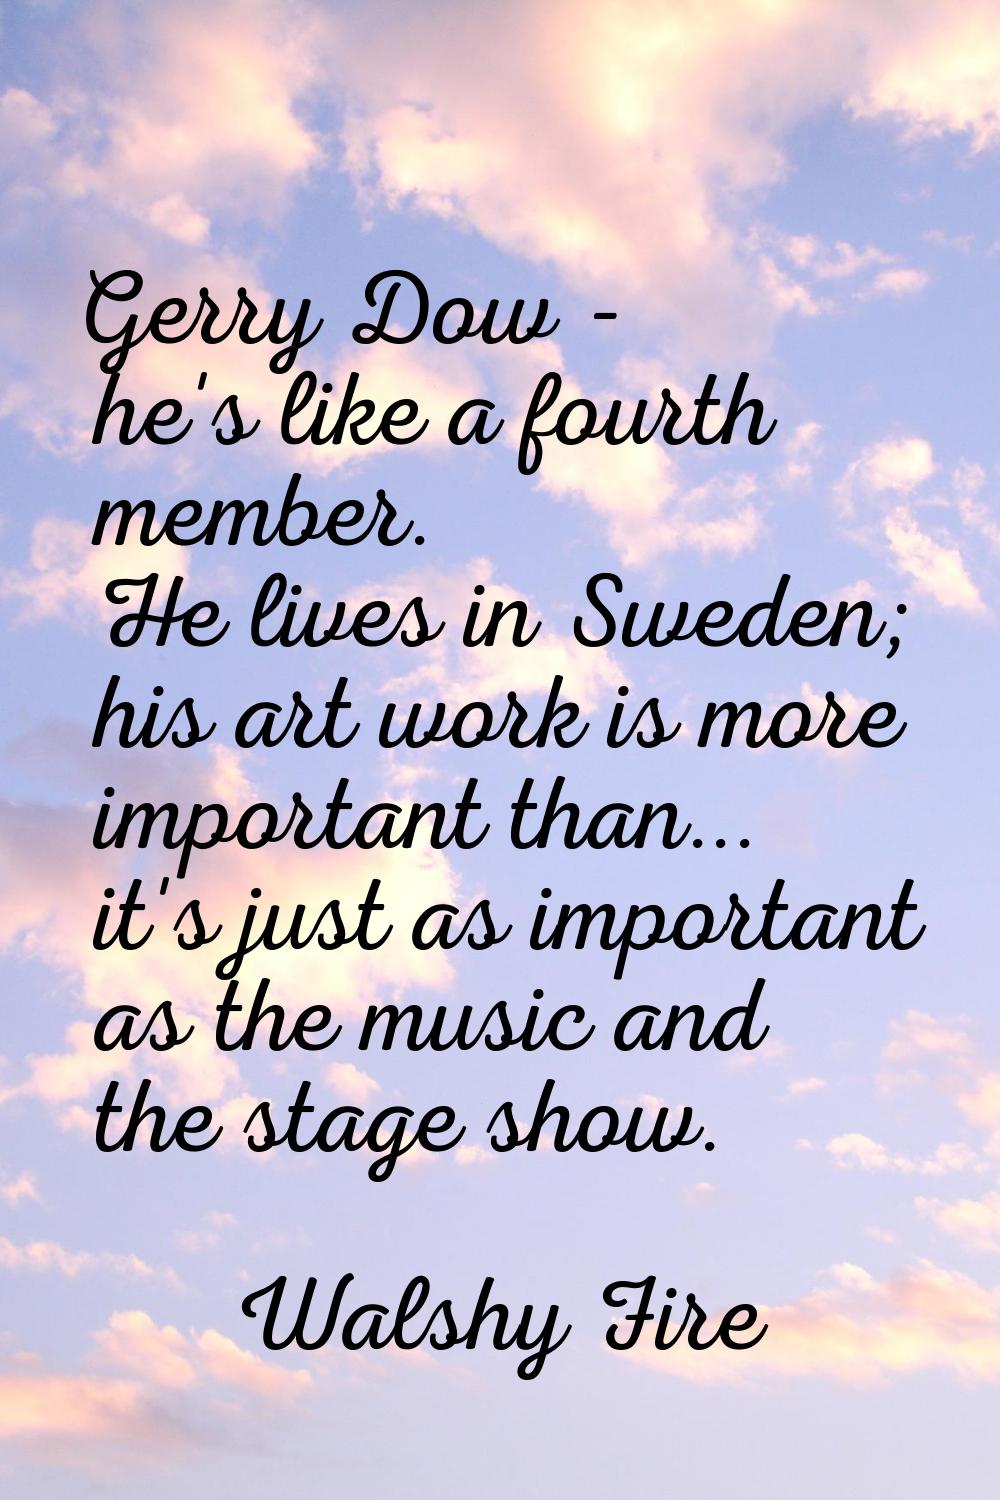 Gerry Dow - he's like a fourth member. He lives in Sweden; his art work is more important than... i